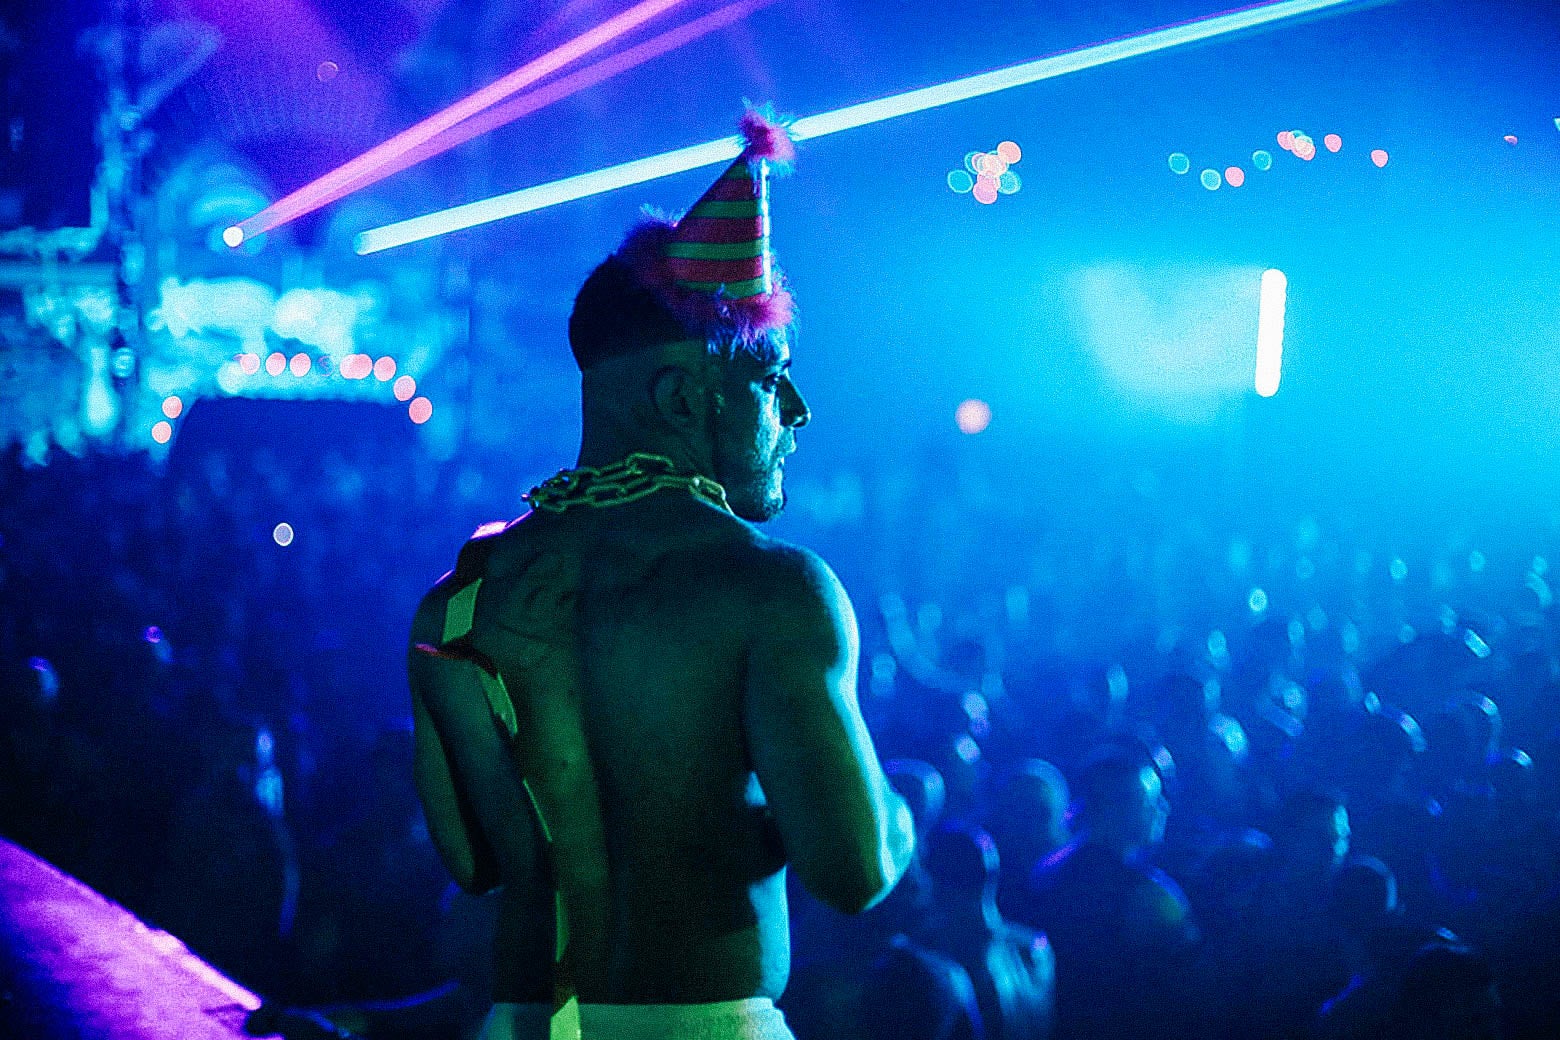 A topless man wearing a party hat and a chain around his neck stands above a crowd of revelers on the dance floor. Laser beams punctuate the dark scene.